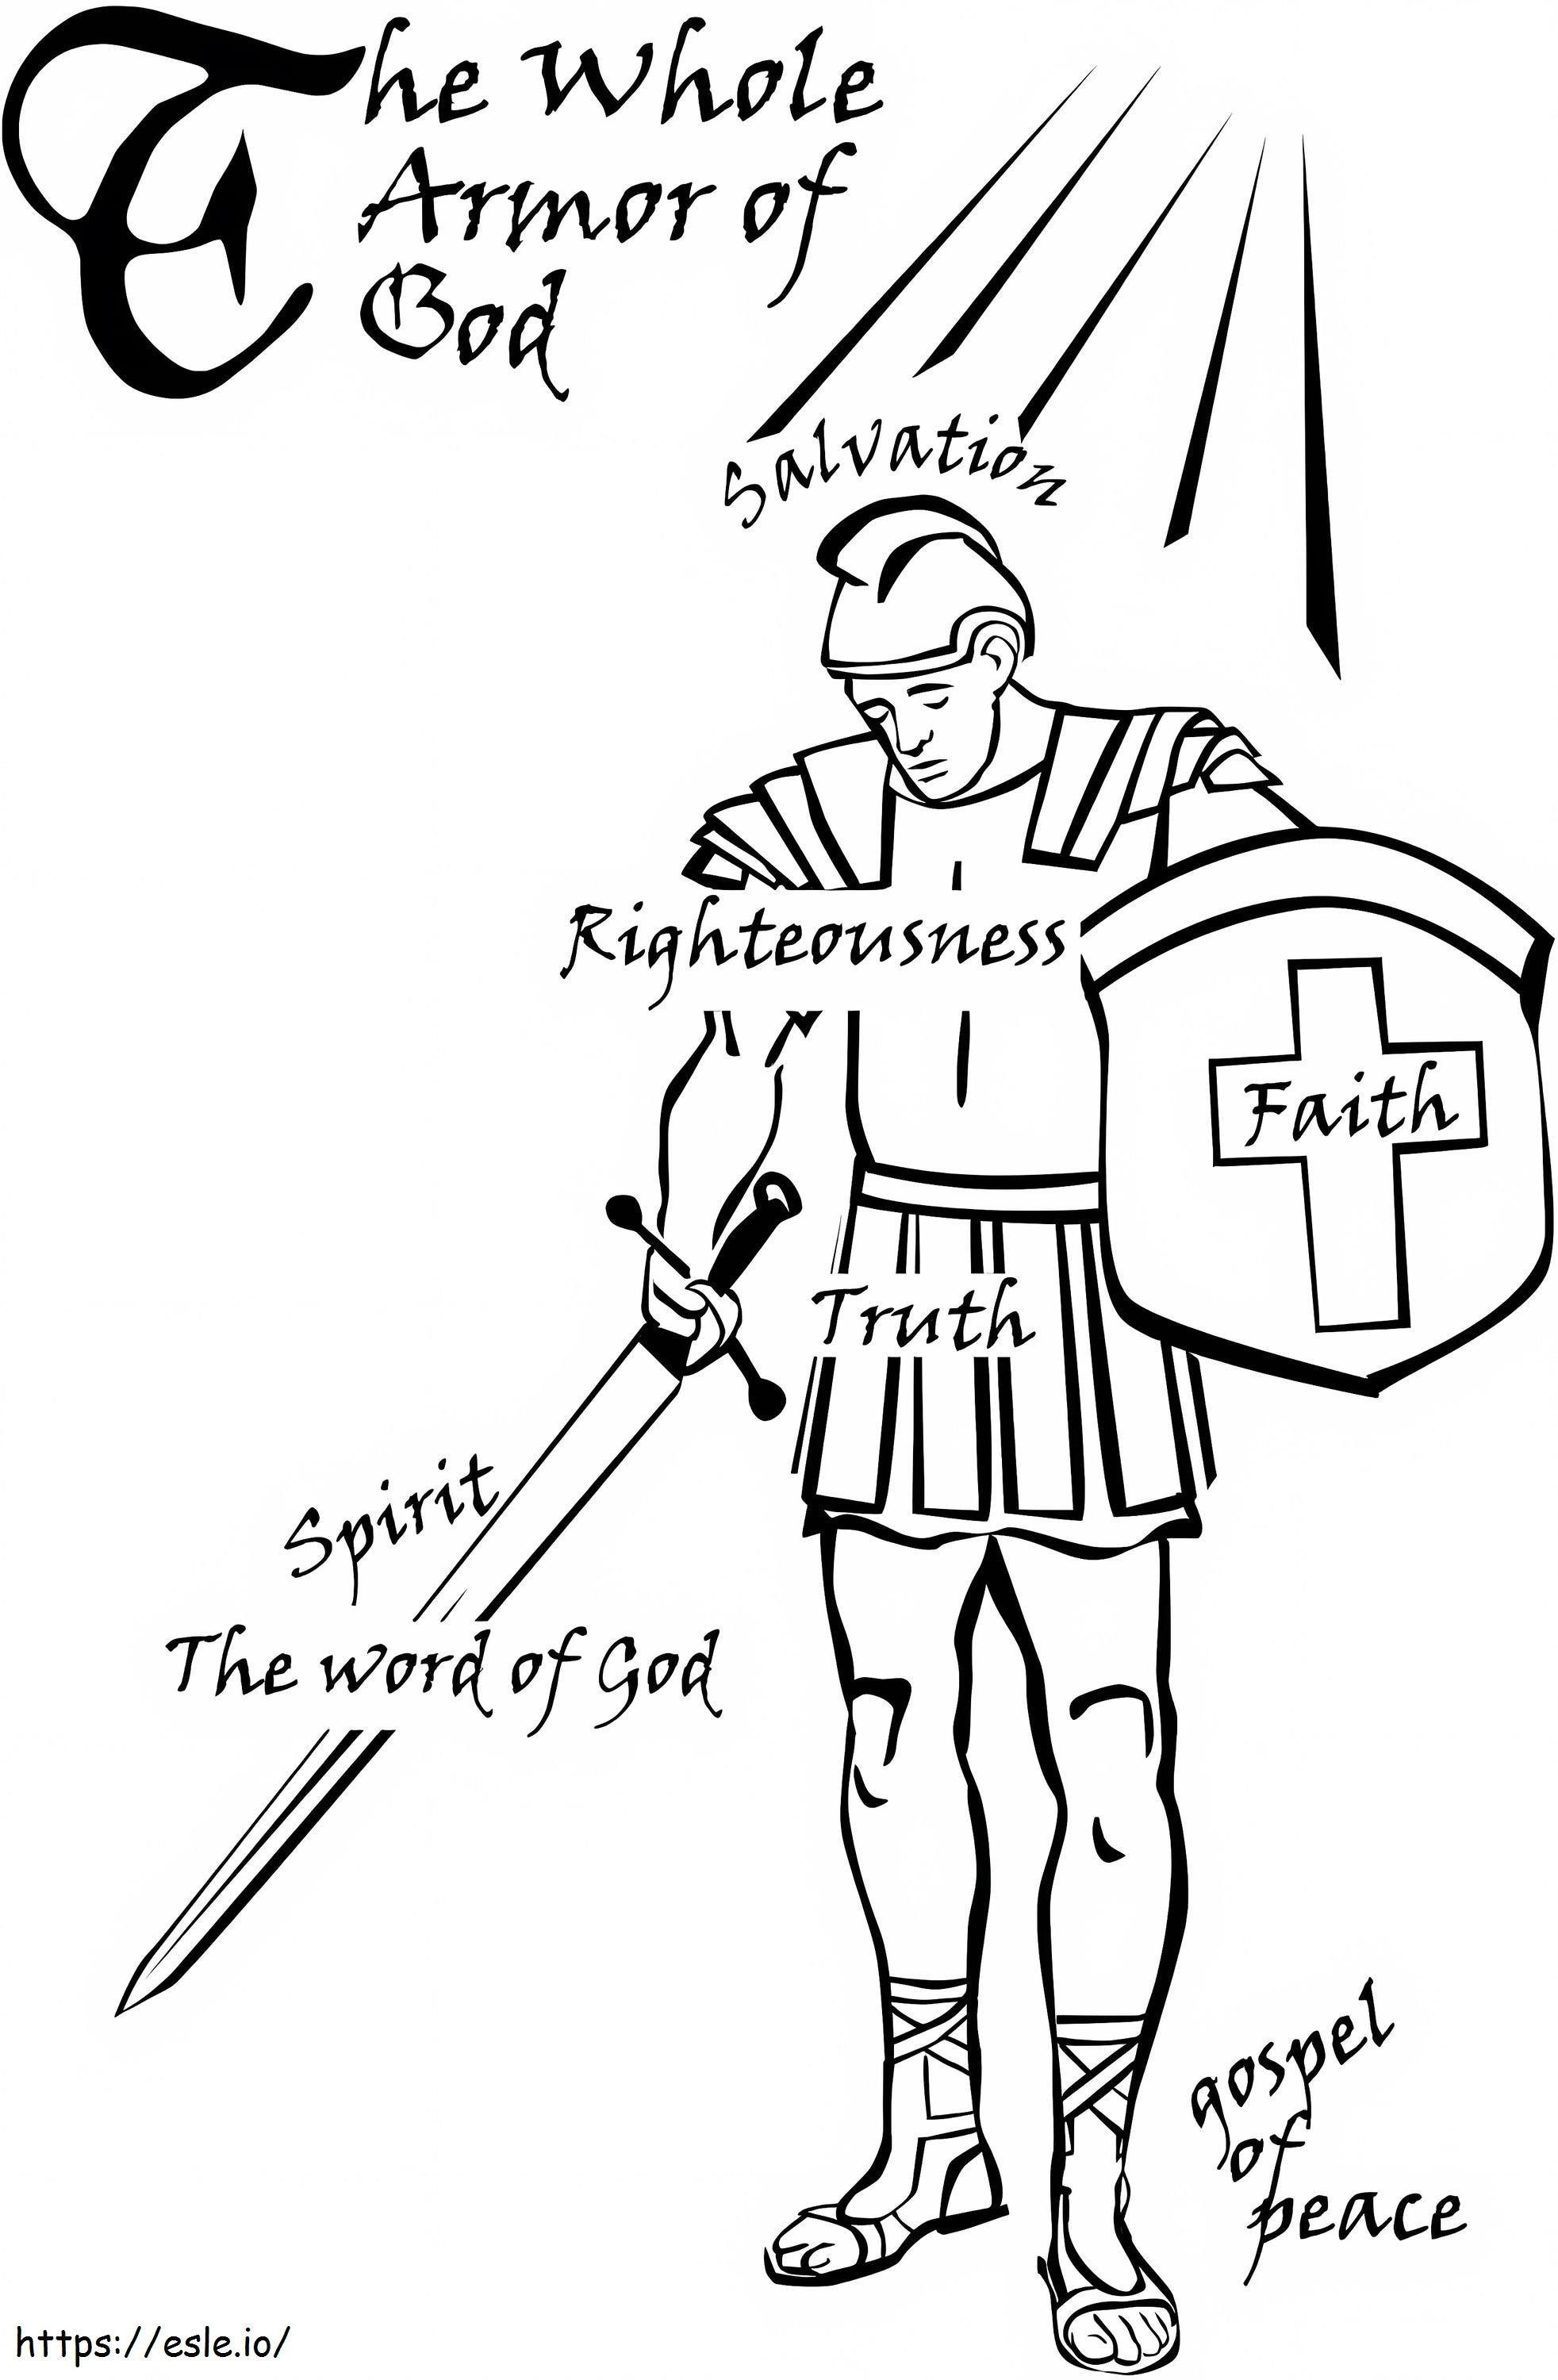 The Whole Armor Of God coloring page